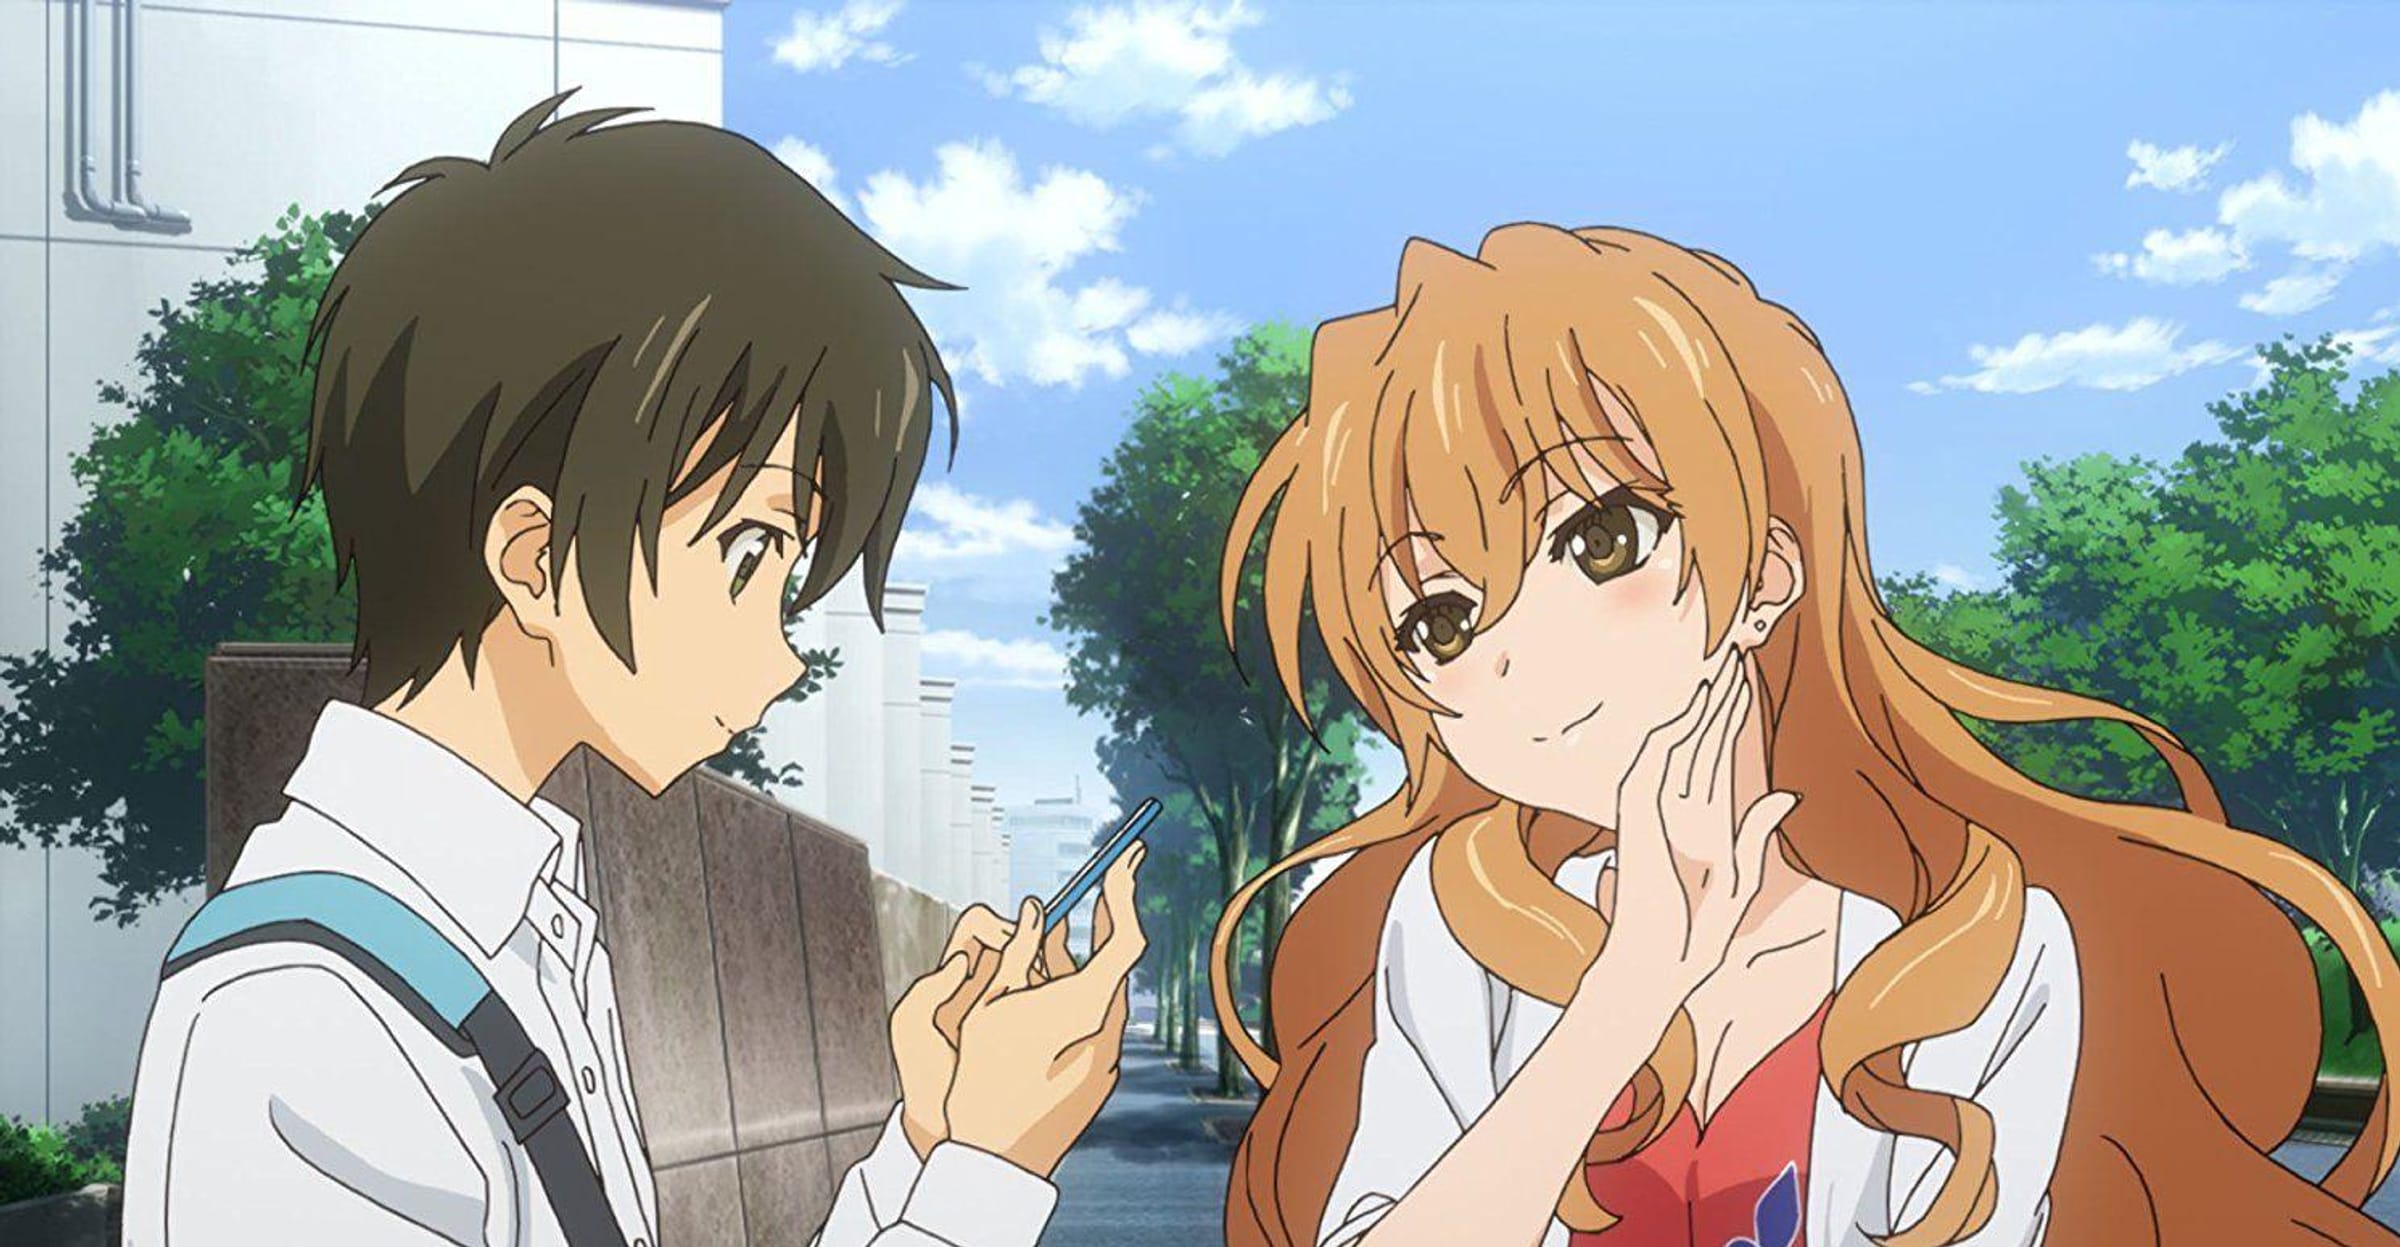 A Collection Of Memorable Quotes From Golden Time You Won't EVER